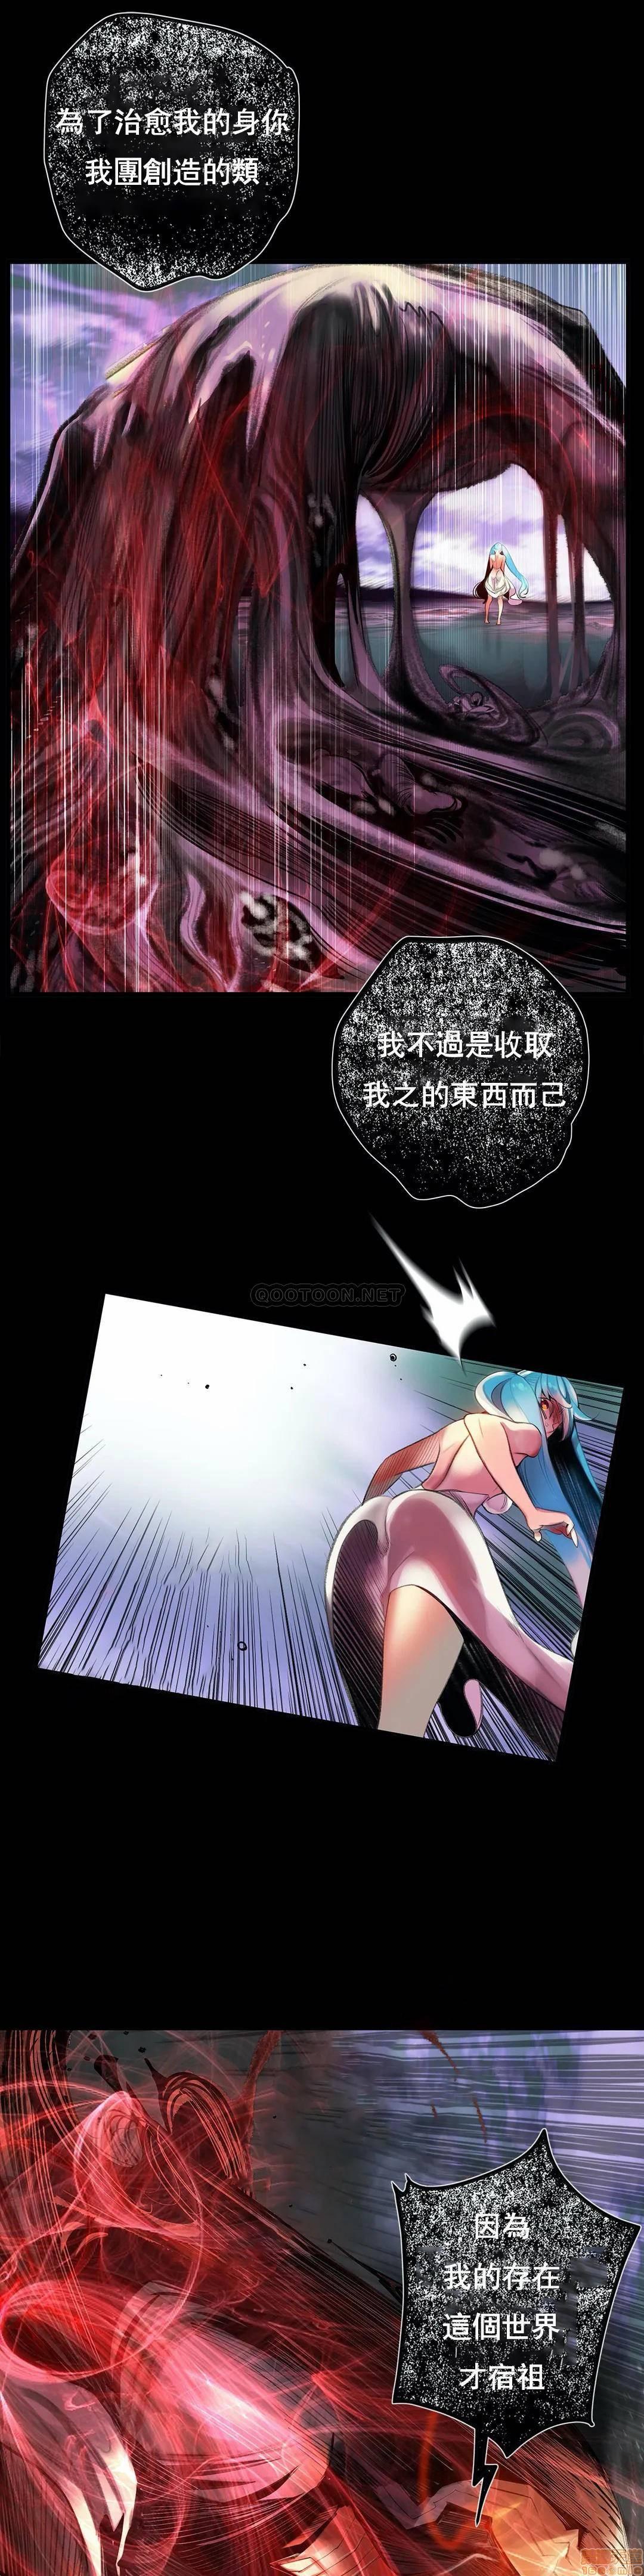 [Juder] Lilith`s Cord (第二季) Ch.77-93 end [Chinese] 228